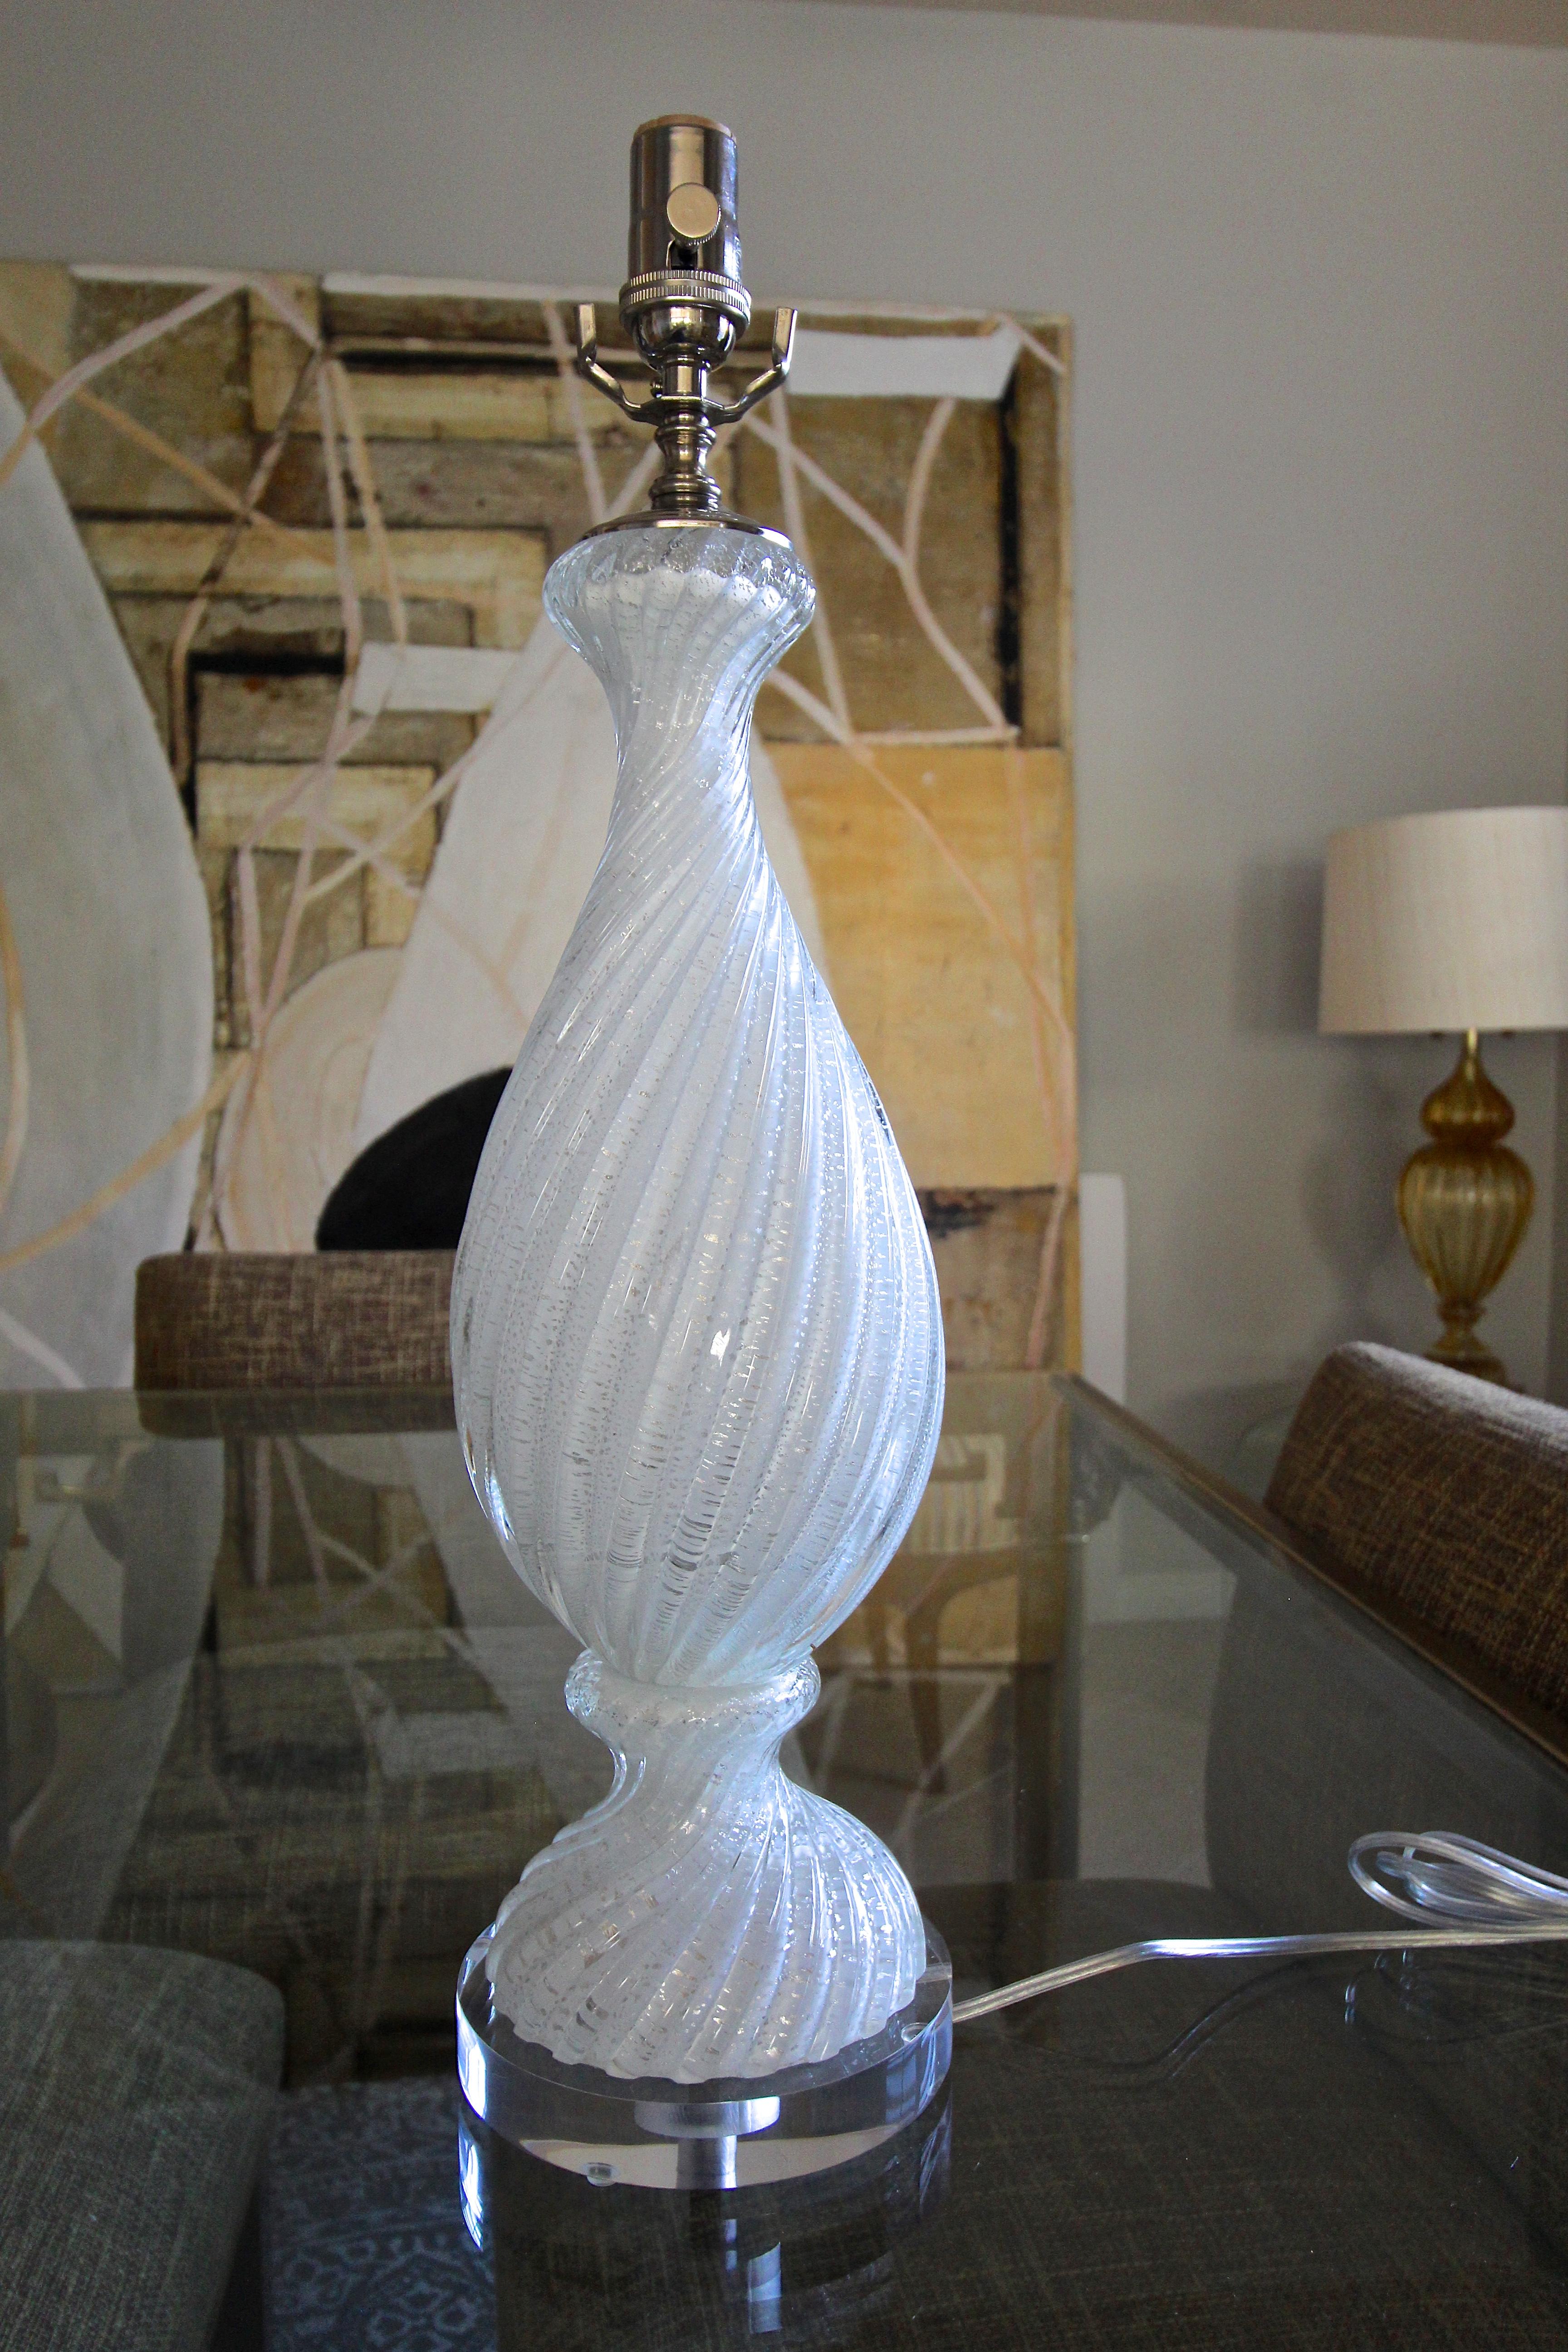 Murano Italian hand blown white twisted glass table lamp with silver mica flecks throughout on custom acrylic base. Rewired with all new polished nickel fittings including new three way socket and cord. This handsome lamp trikes the perfect balance